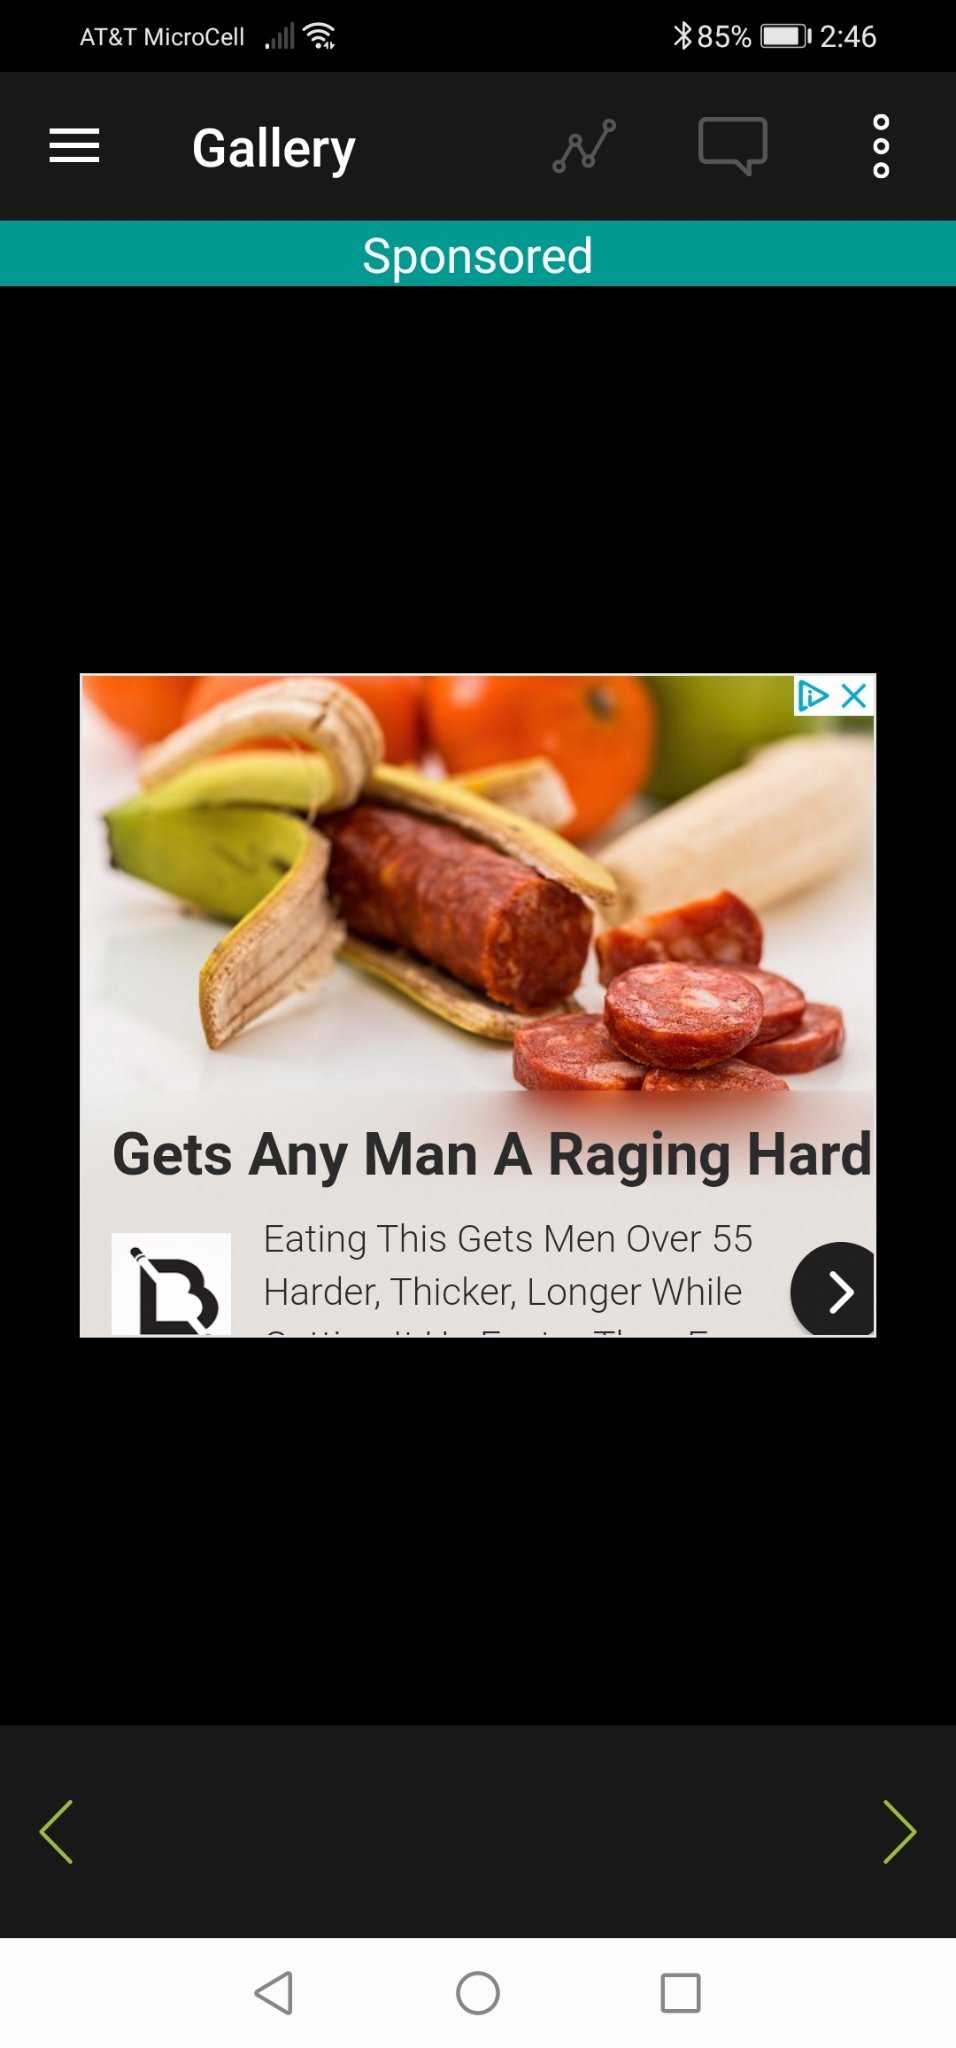 Ad presented to me on memedroid